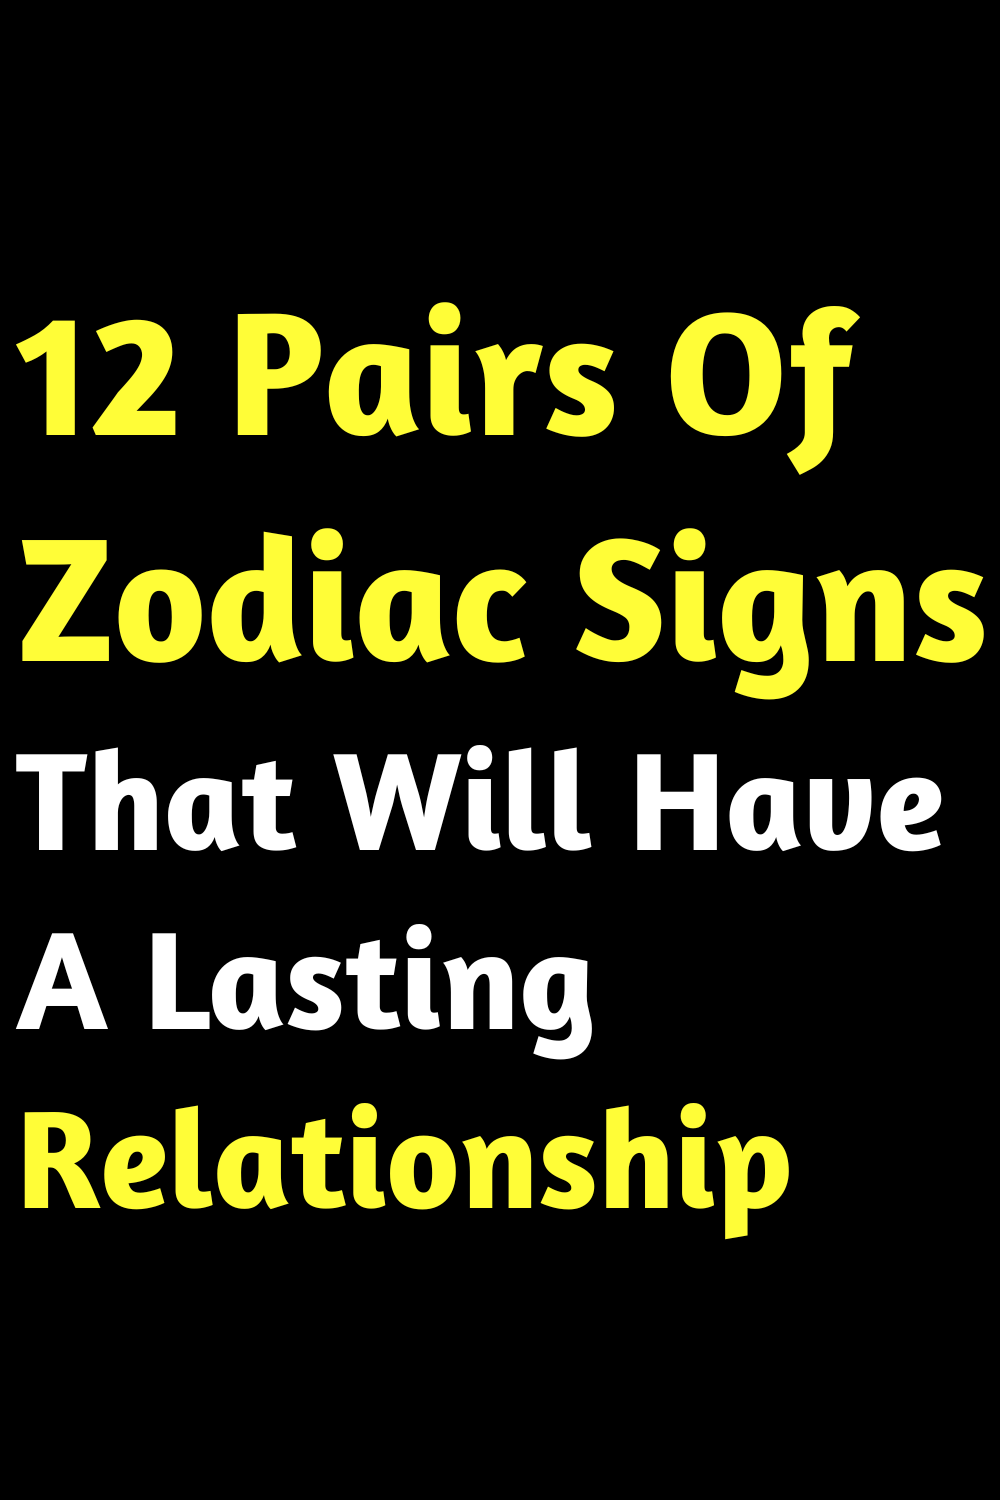 12 Pairs Of Zodiac Signs That Will Have A Lasting Relationship